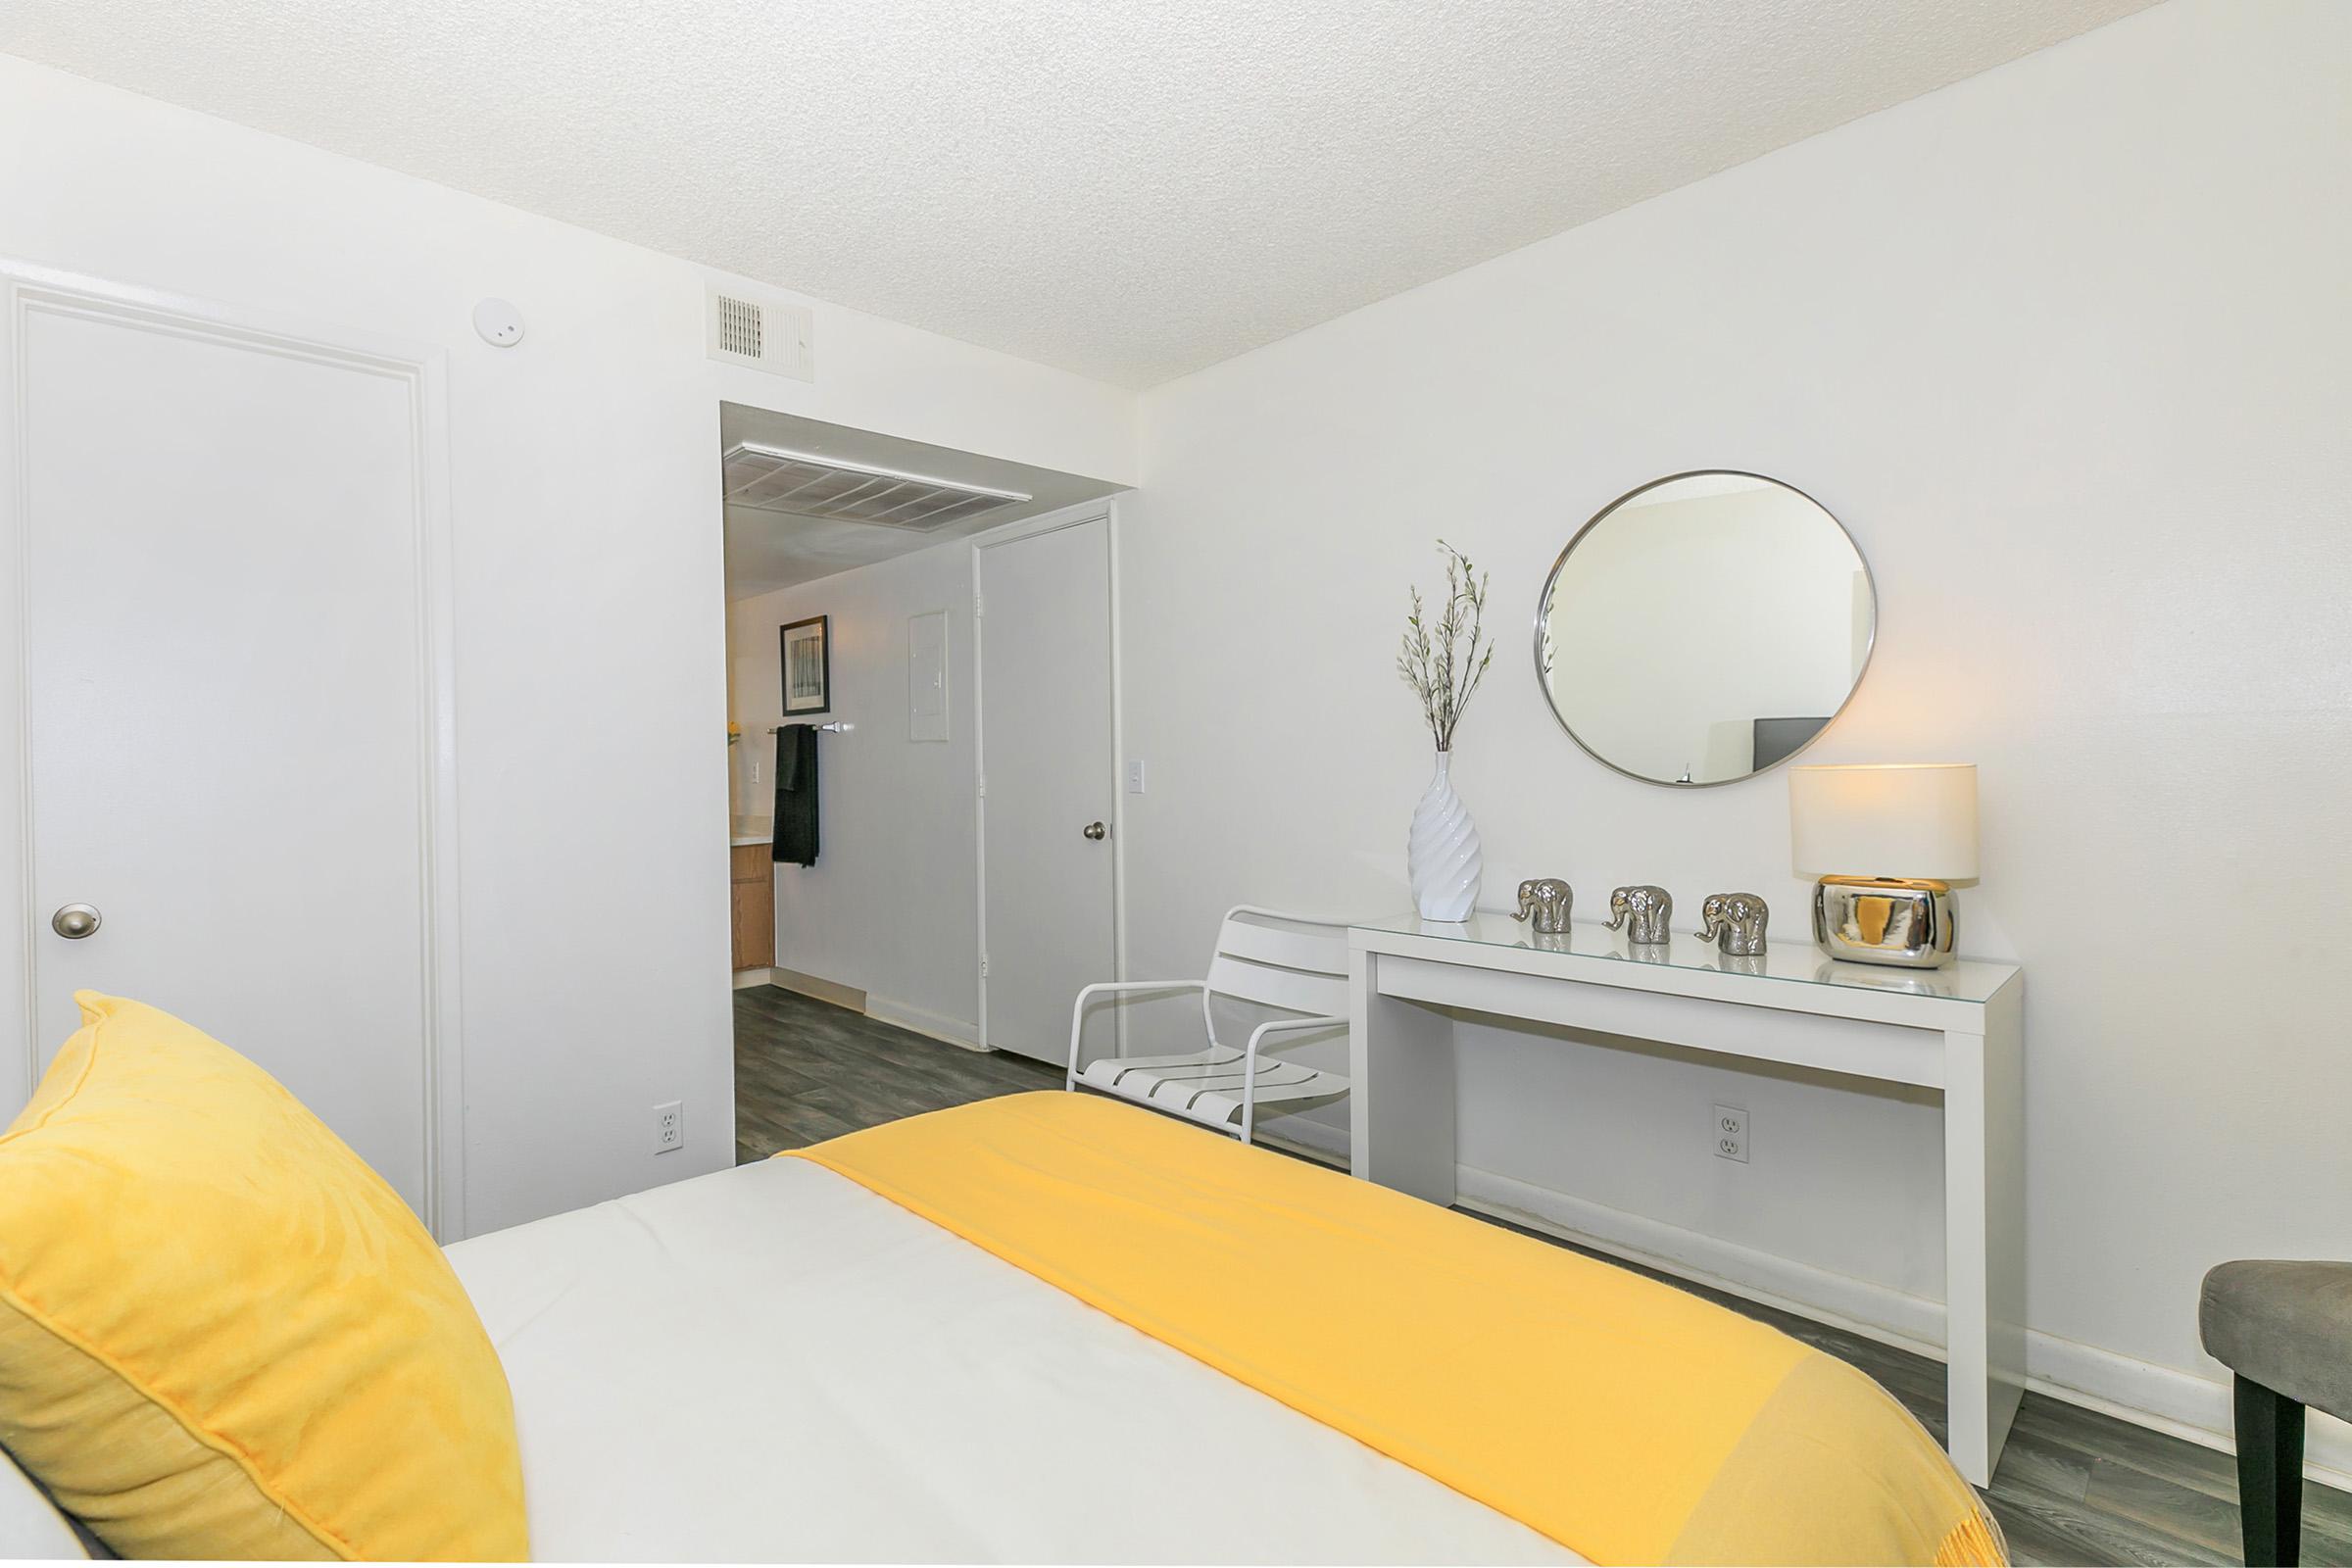 A queen bed in a bedroom with an en-suite bathroom at Rise North Ridge.